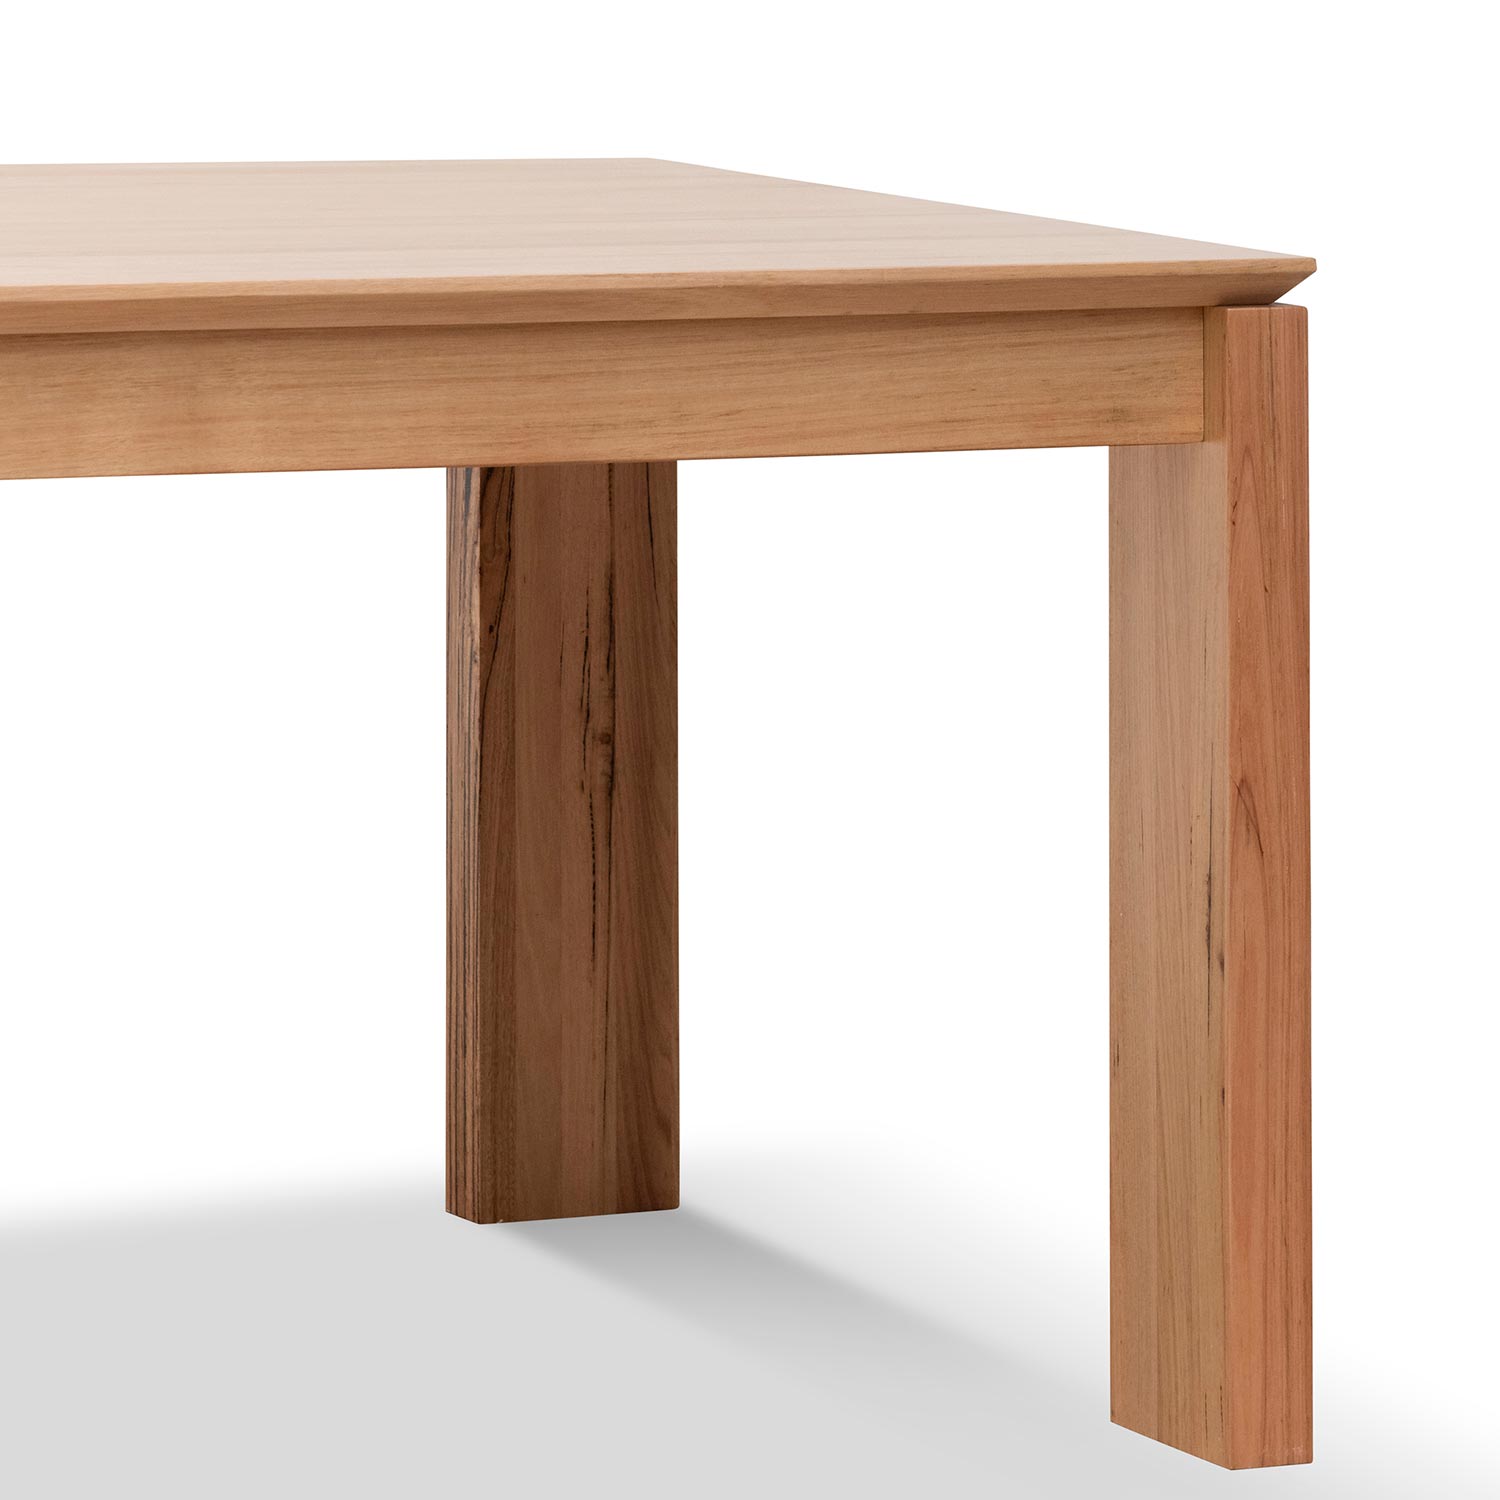 Amparo 2.4m Dining Table - Messmate - Dining Tables